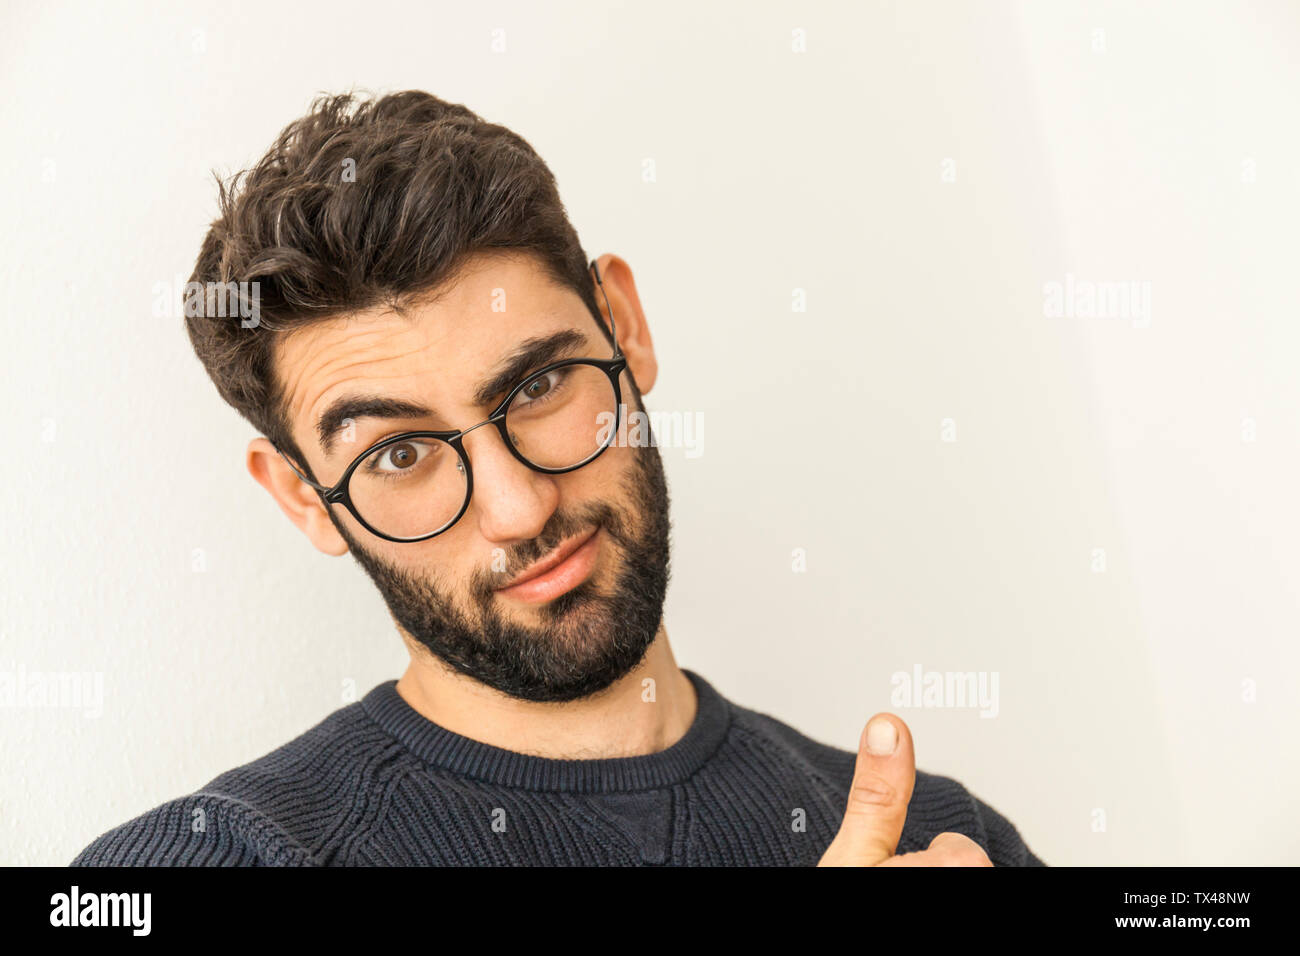 Portrait of doubting young man with beard and glasses Stock Photo